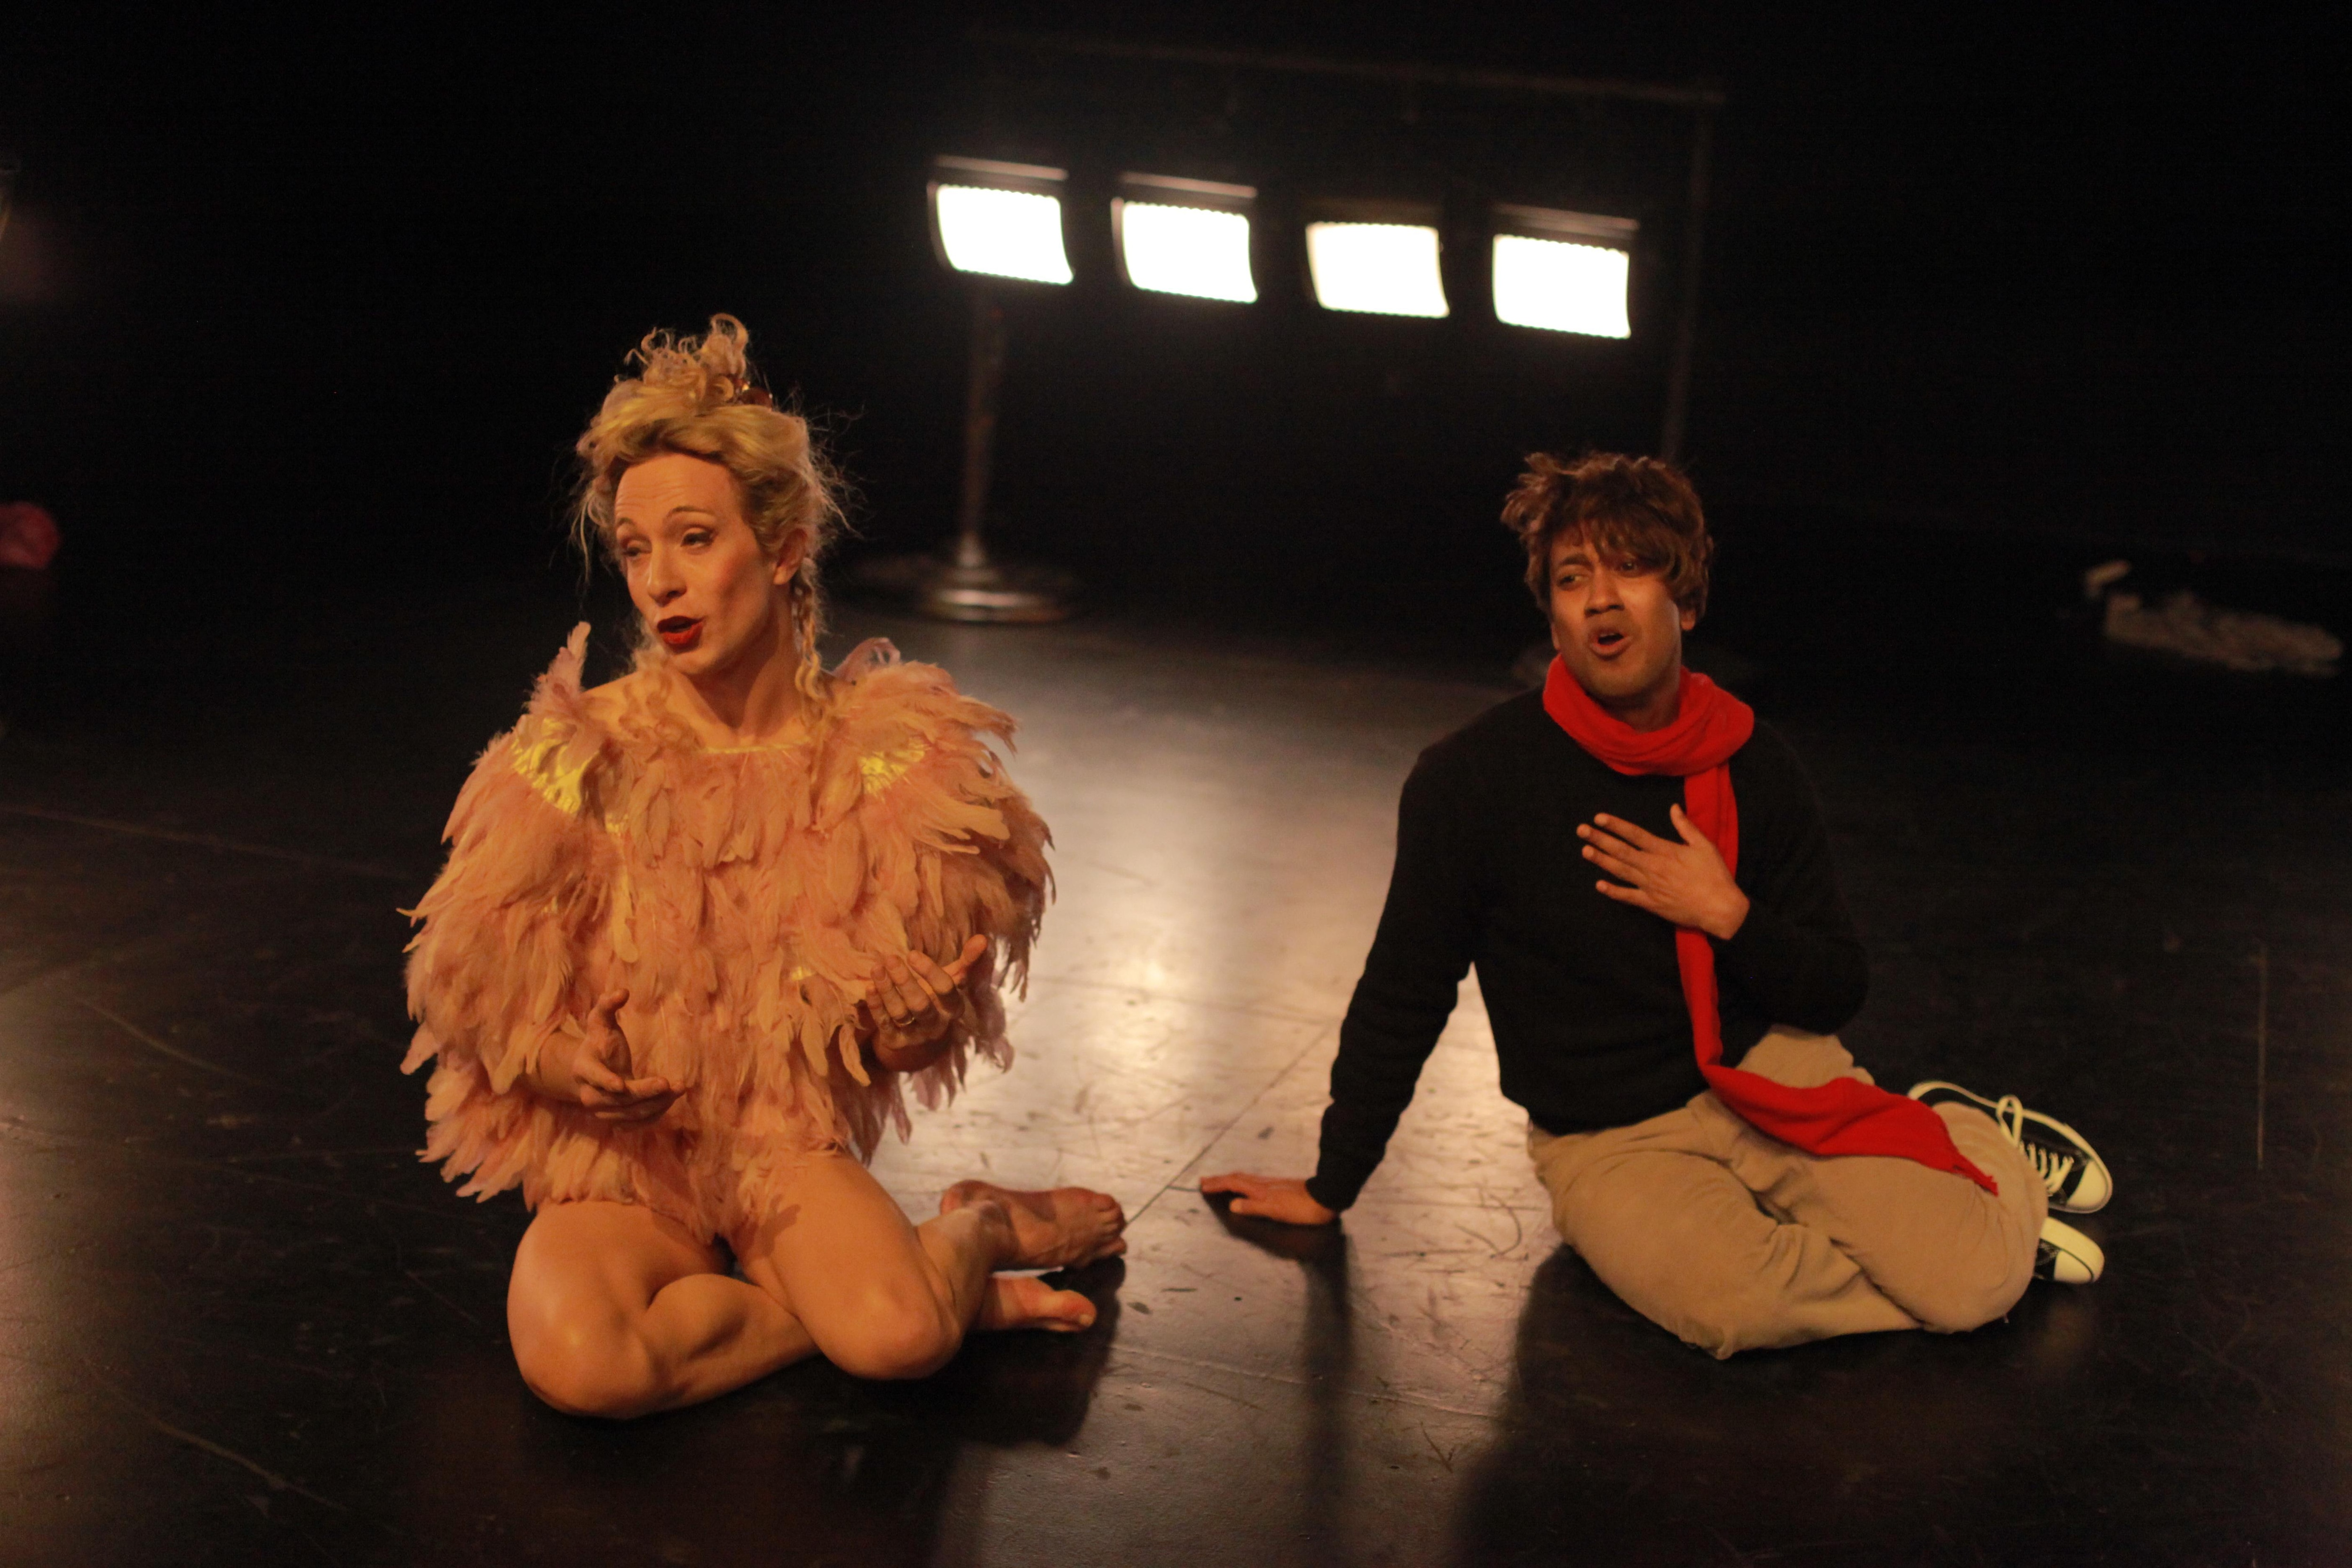 Two dancers sitting on the floor, mouths agape